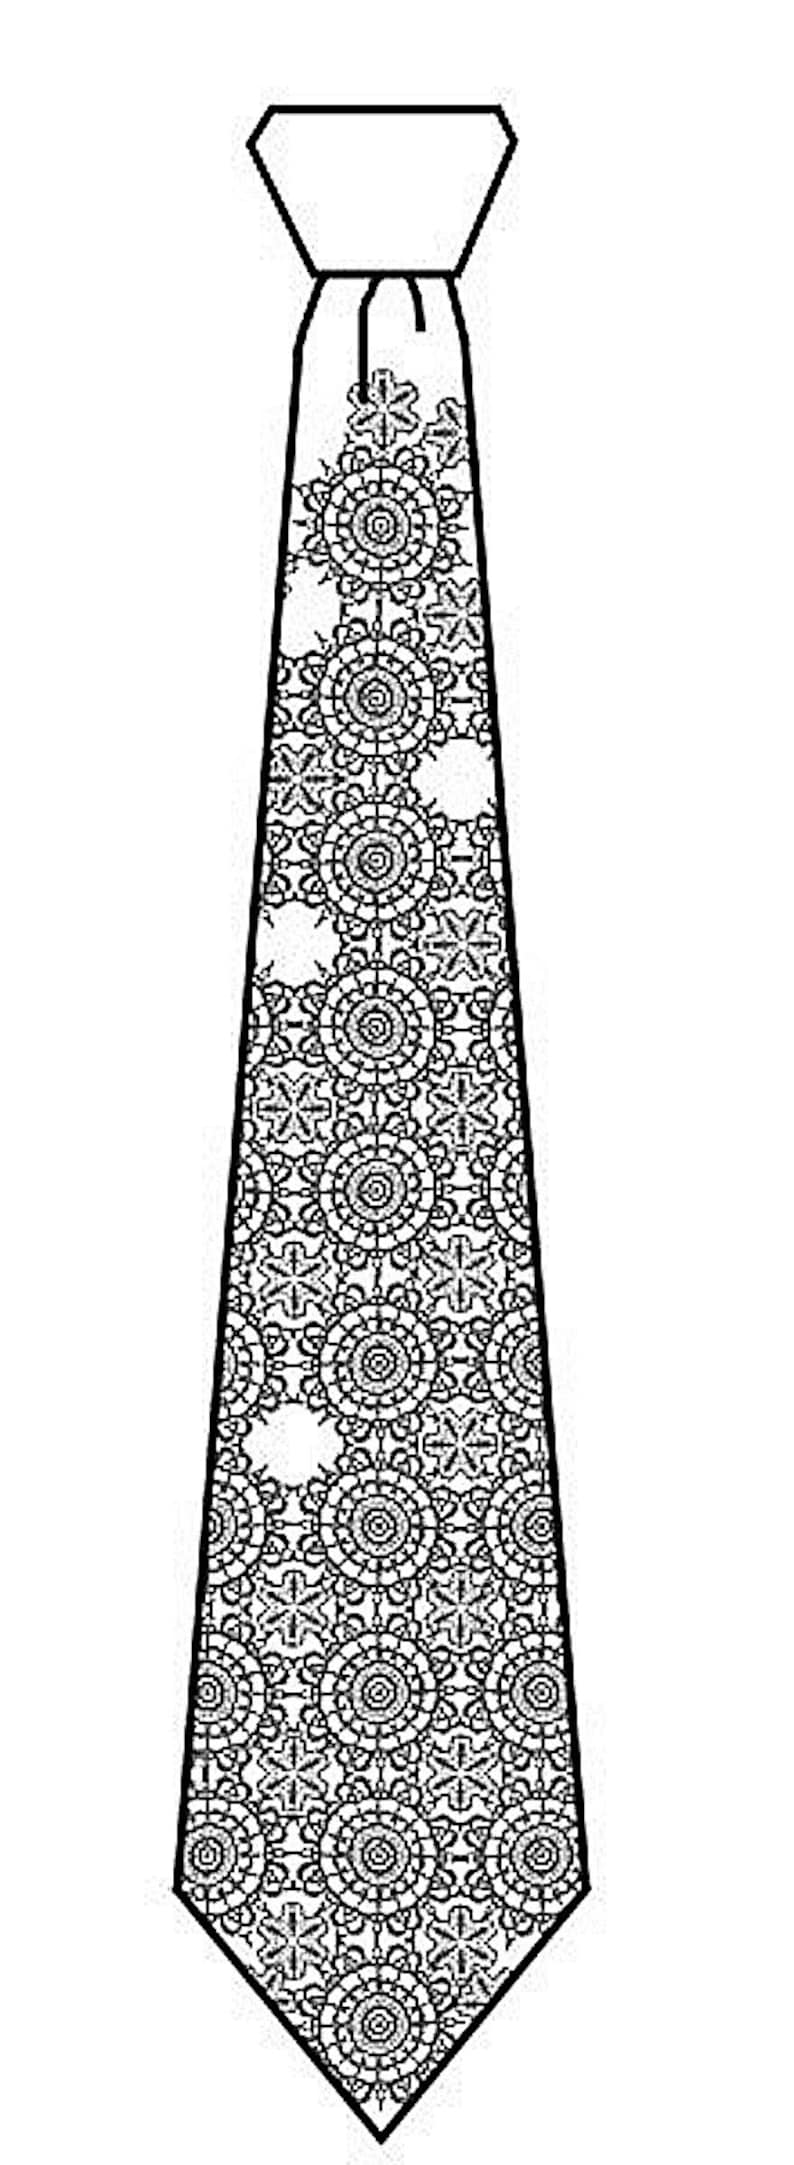 Doily Lace necktie. Men's rustic Cottage Lace tie, warm cream print. Standard, extra long narrow or skinny size. Groom, groomsmen gift. image 4